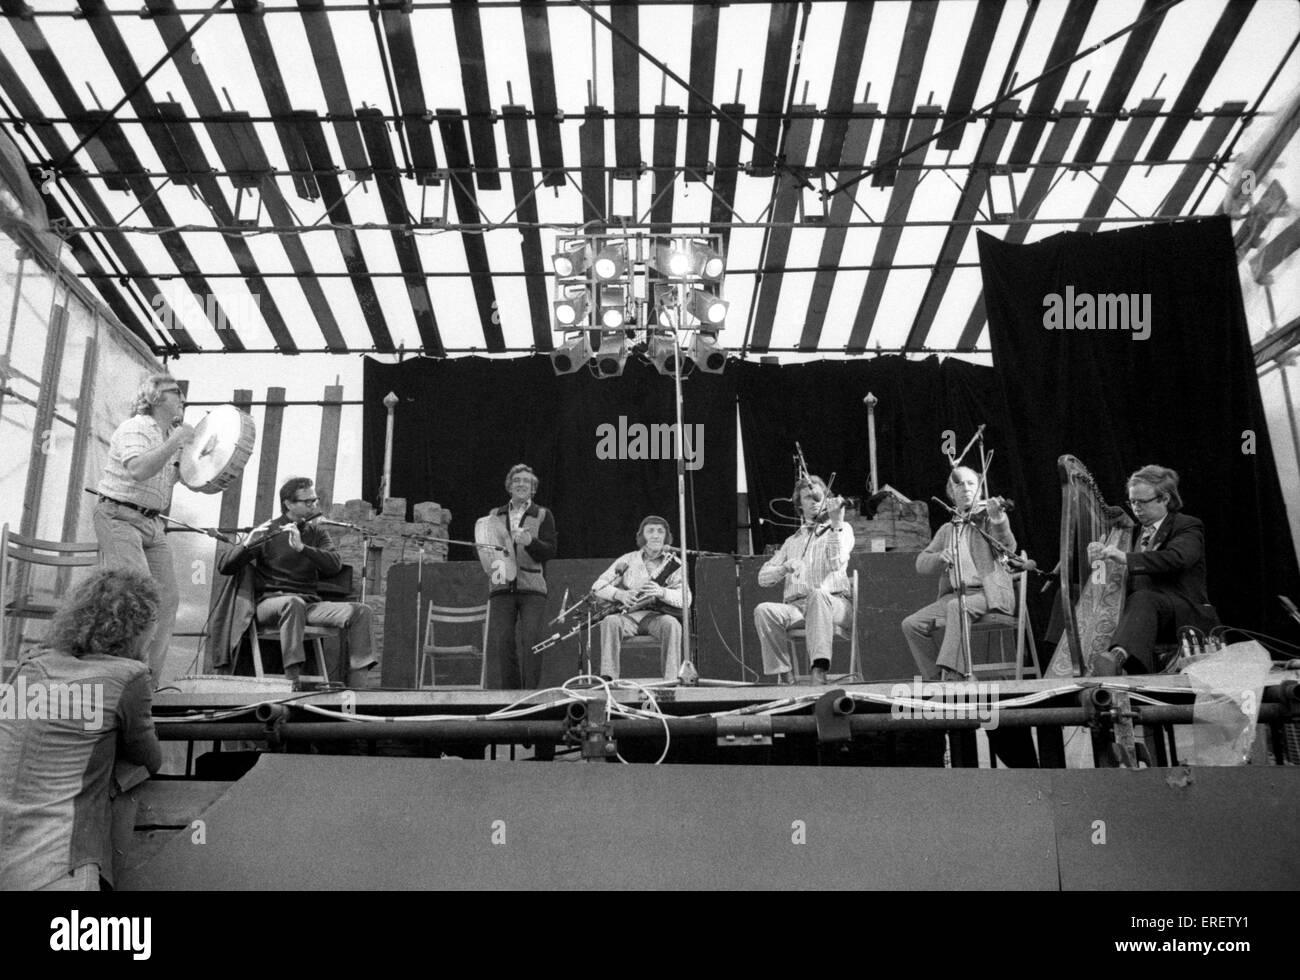 Irish band The Chieftains performing at the July Wakes folk festival in Chorley, Lancashire, on 25 July 1976. Stock Photo